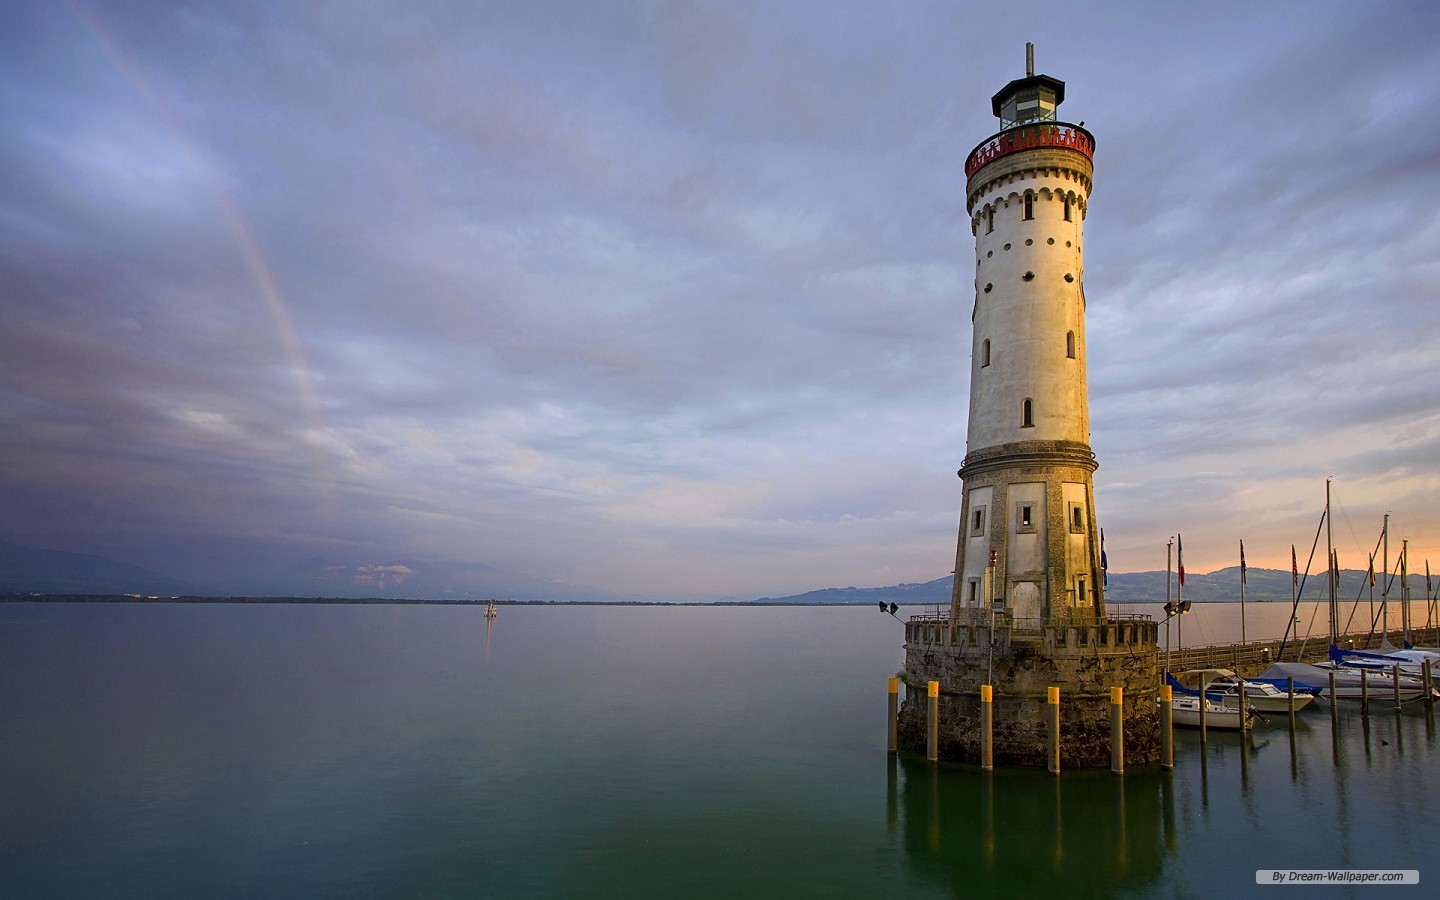 Wallpaper Lighthouses Pictures To Pin